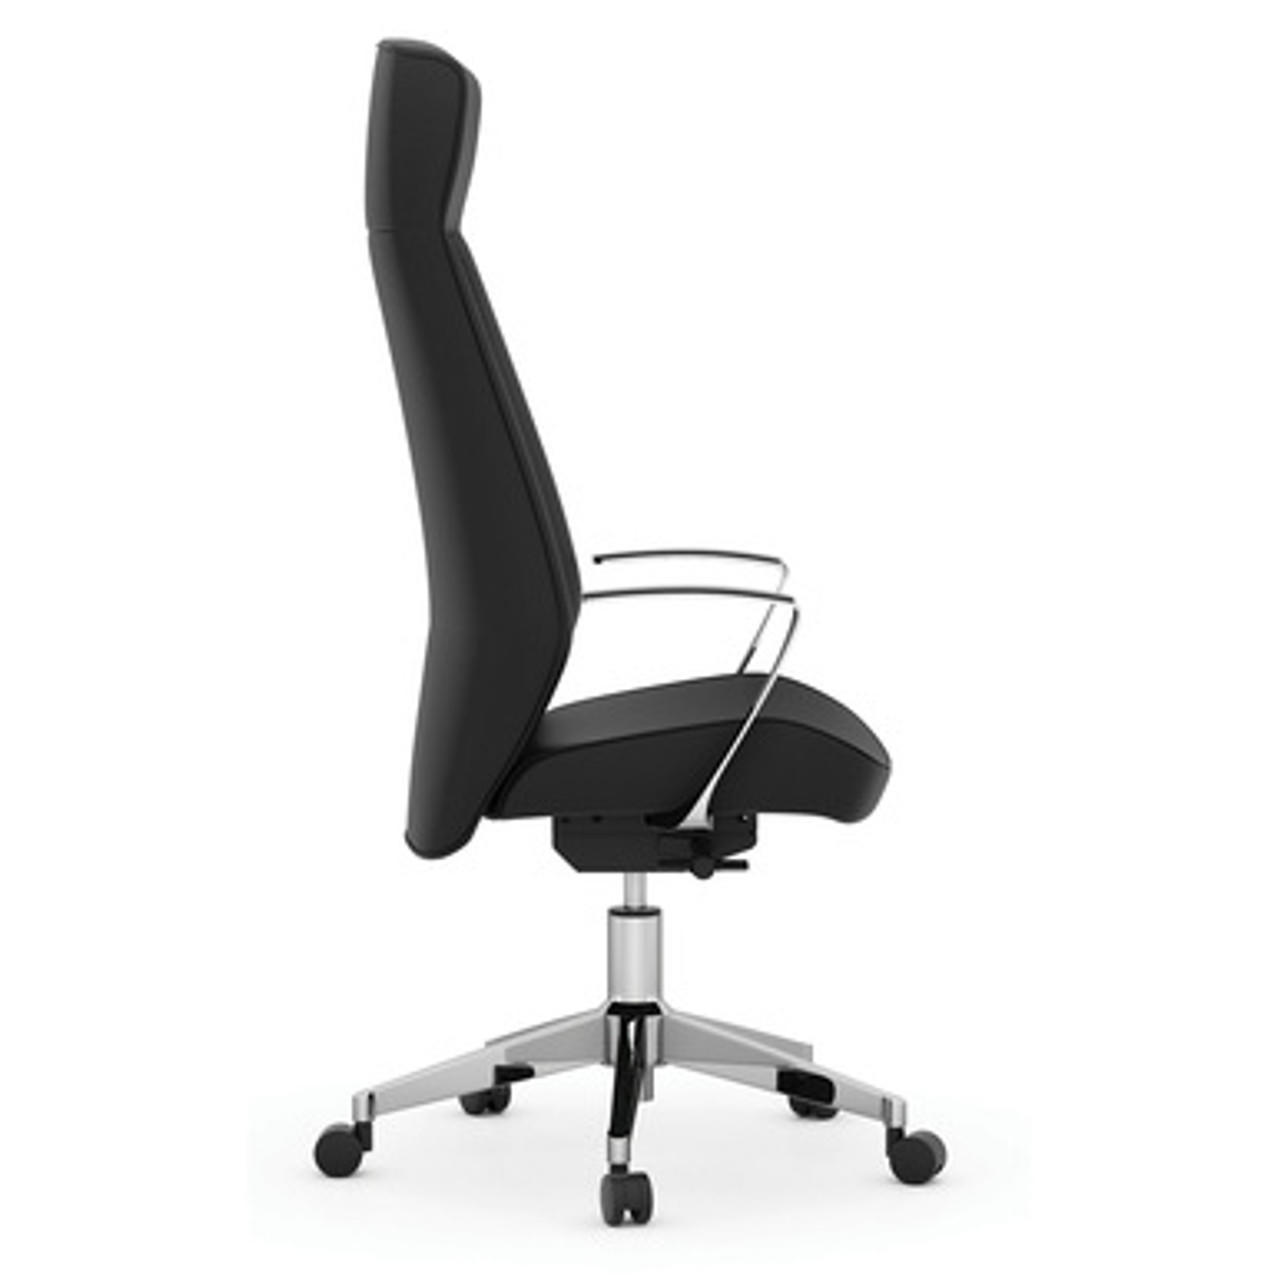  Office Source Empire Collection Contemporary Executive Chair with Chrome Frame 01CU2AHACL 